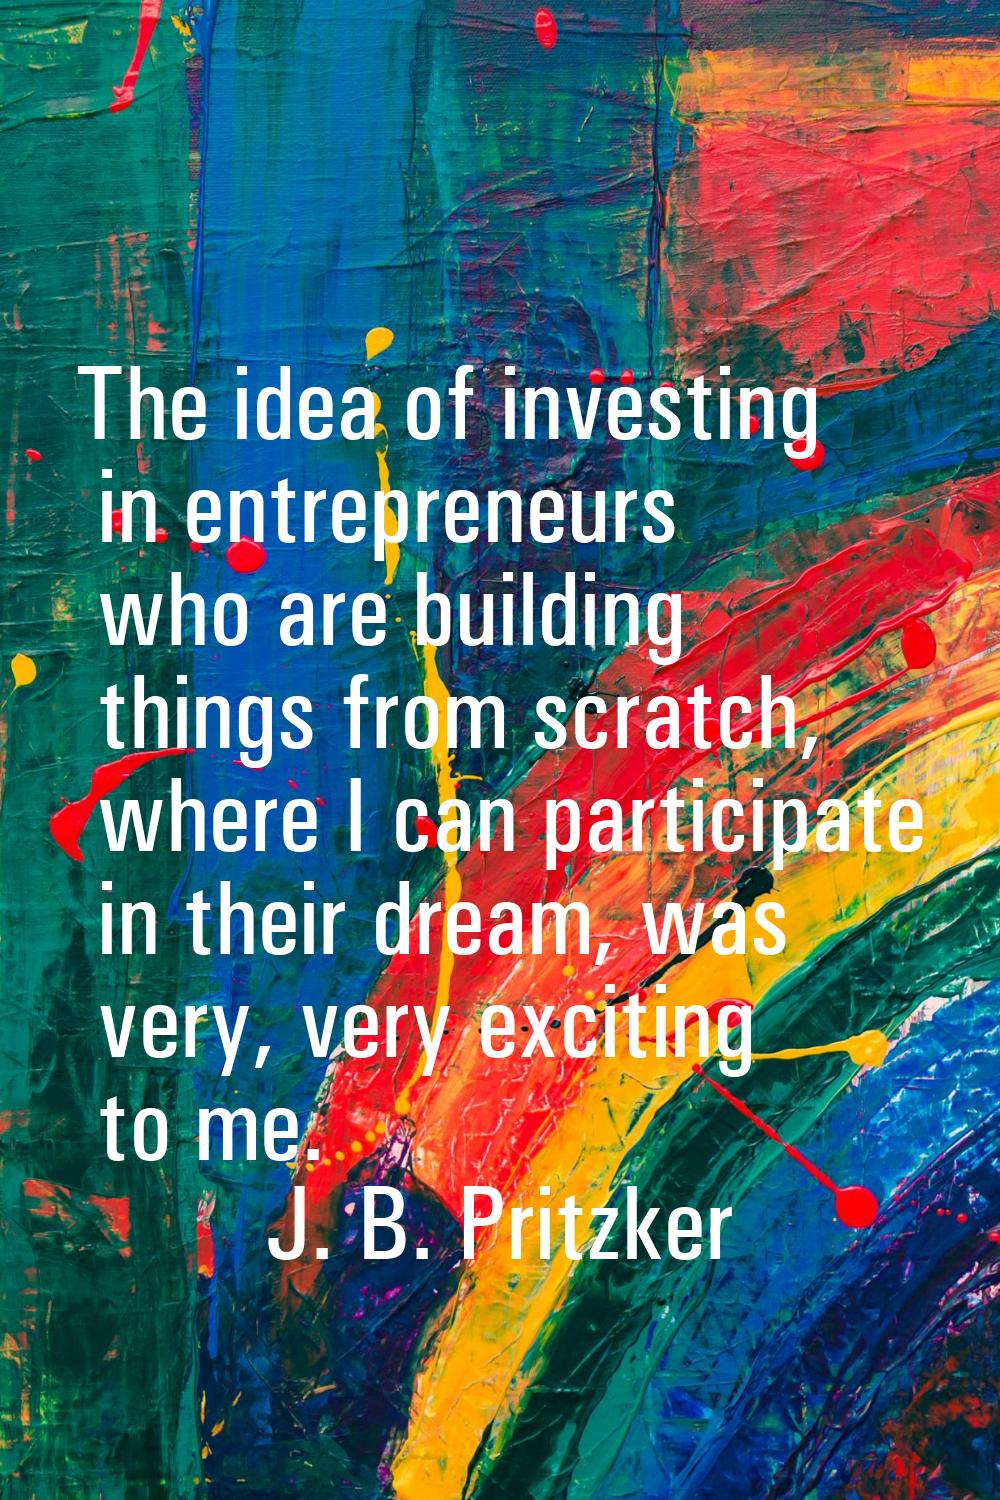 The idea of investing in entrepreneurs who are building things from scratch, where I can participat